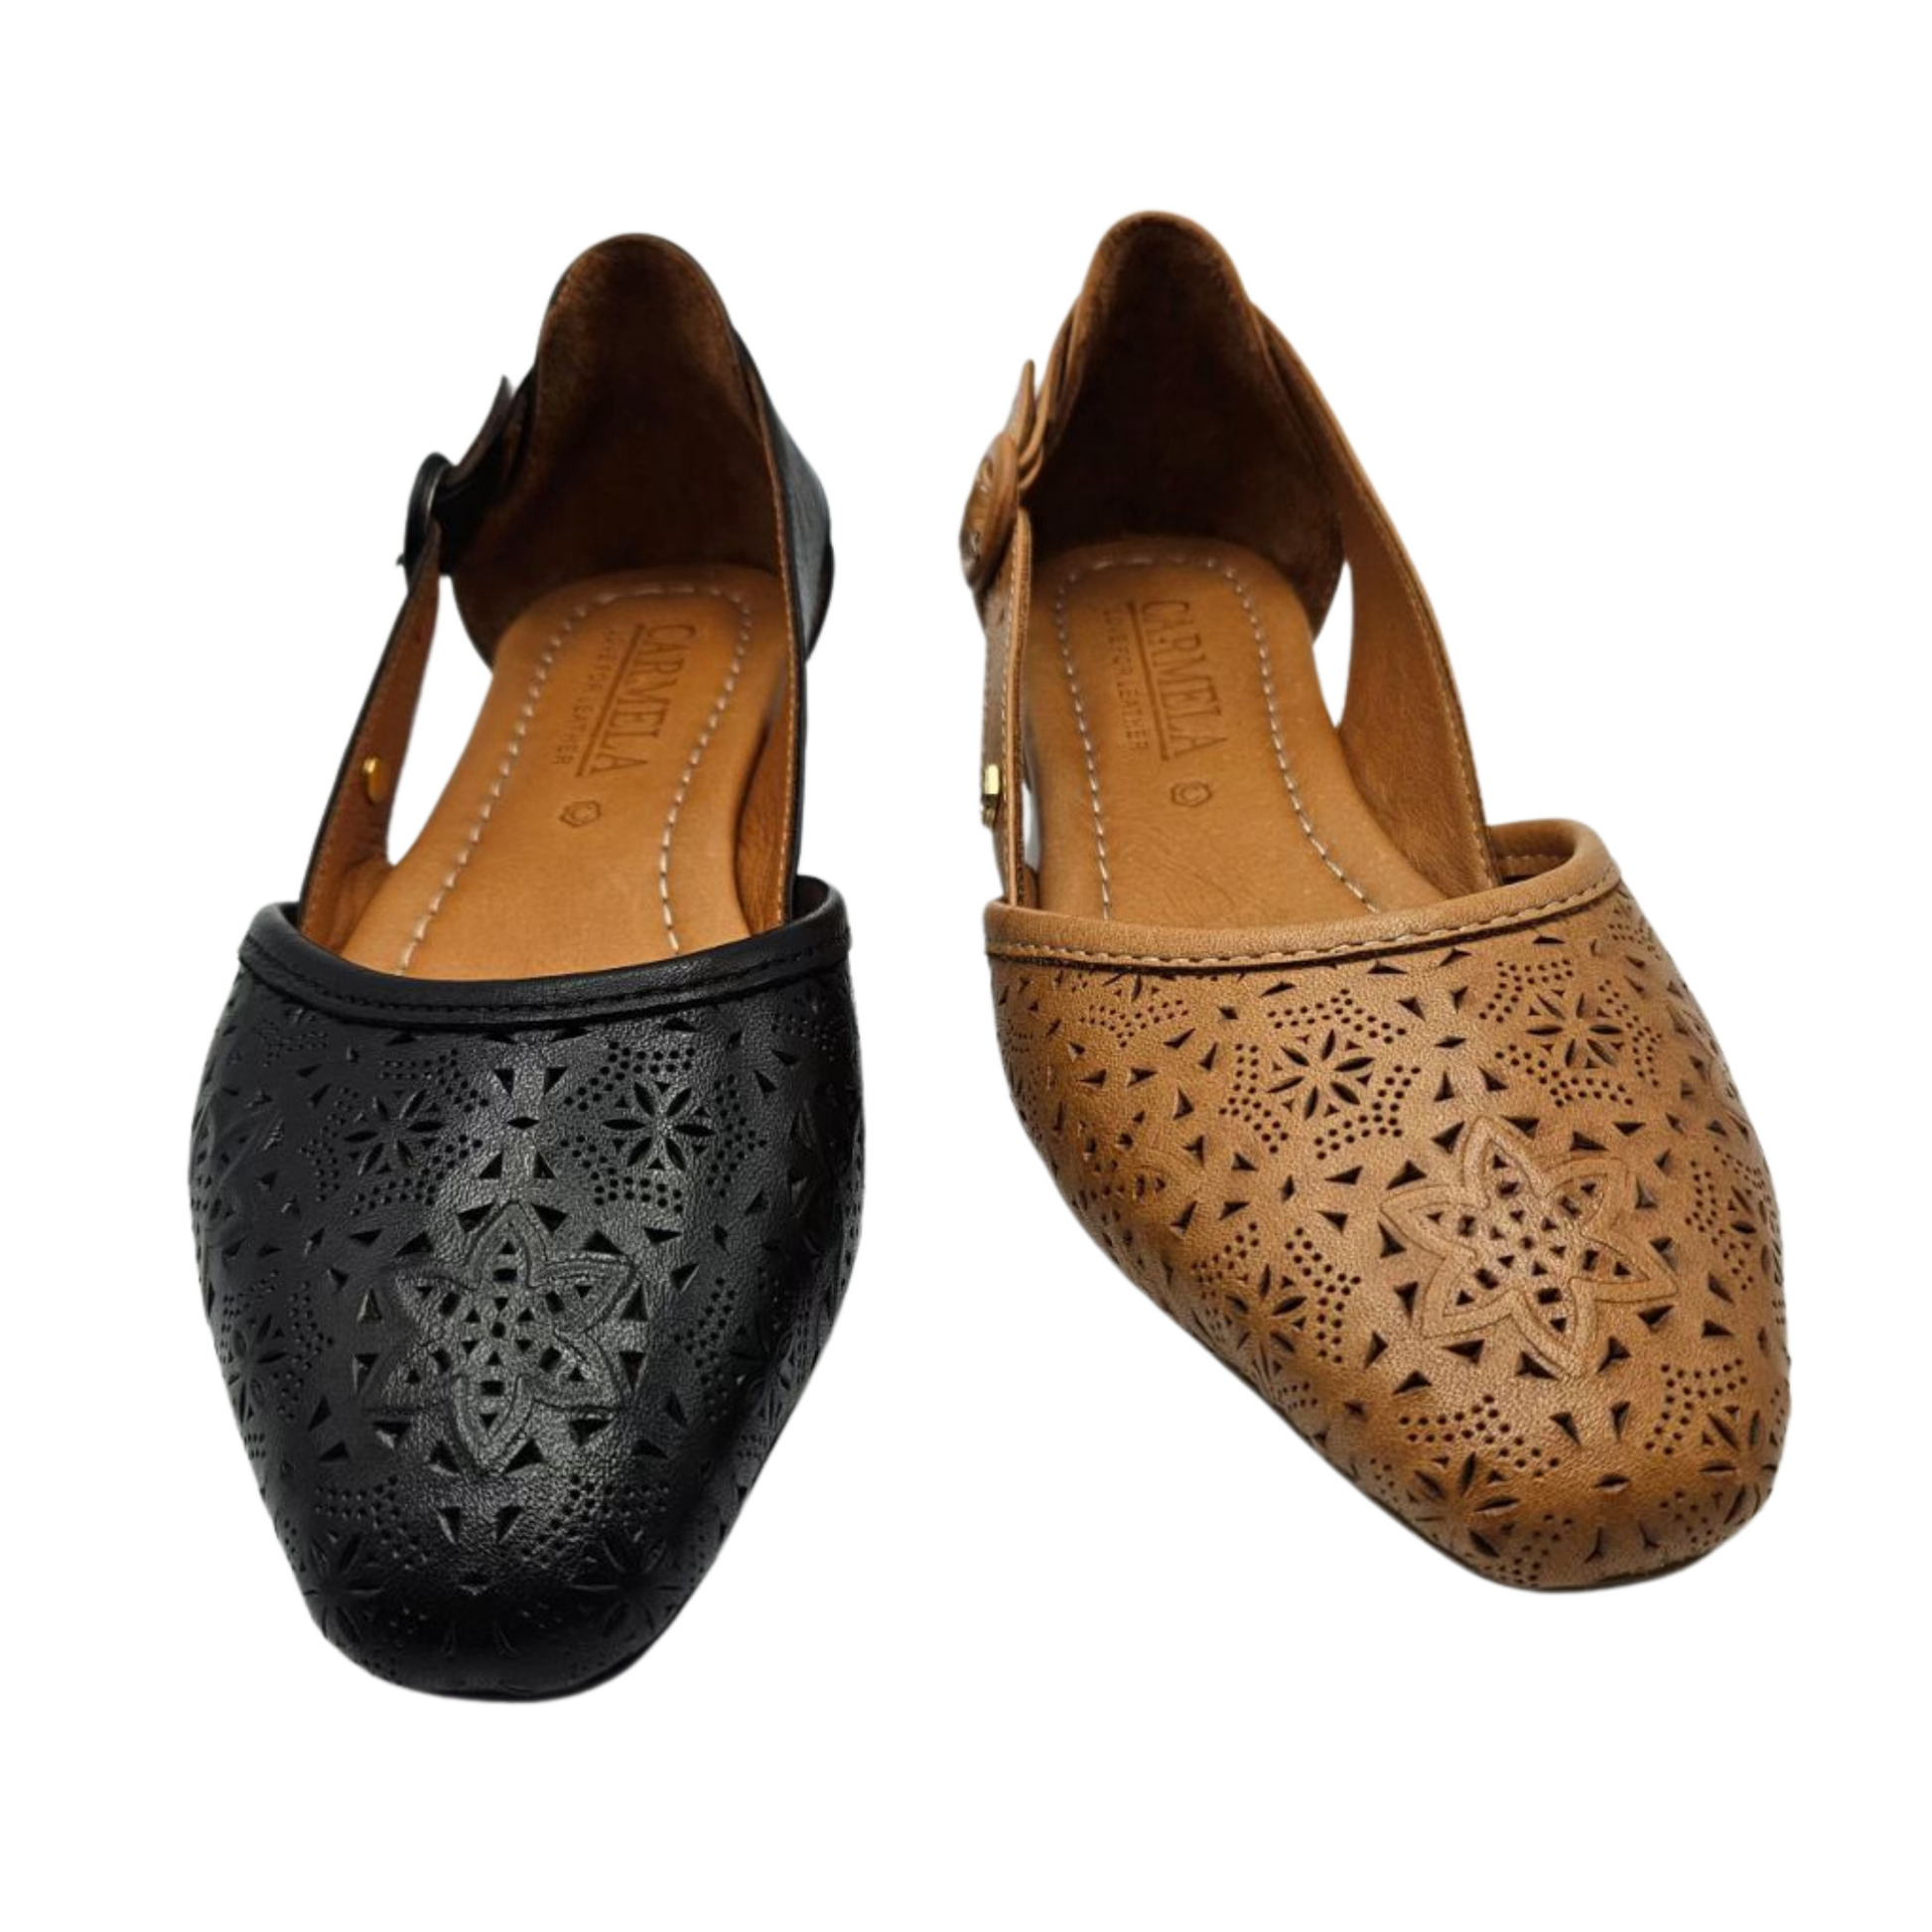 Front view of two flat shoes side by side. The left one is black and the right one is tan. Both have perforated floral designs on the front and adjustable side buckle straps. Slightly pointed toe and leather lined.